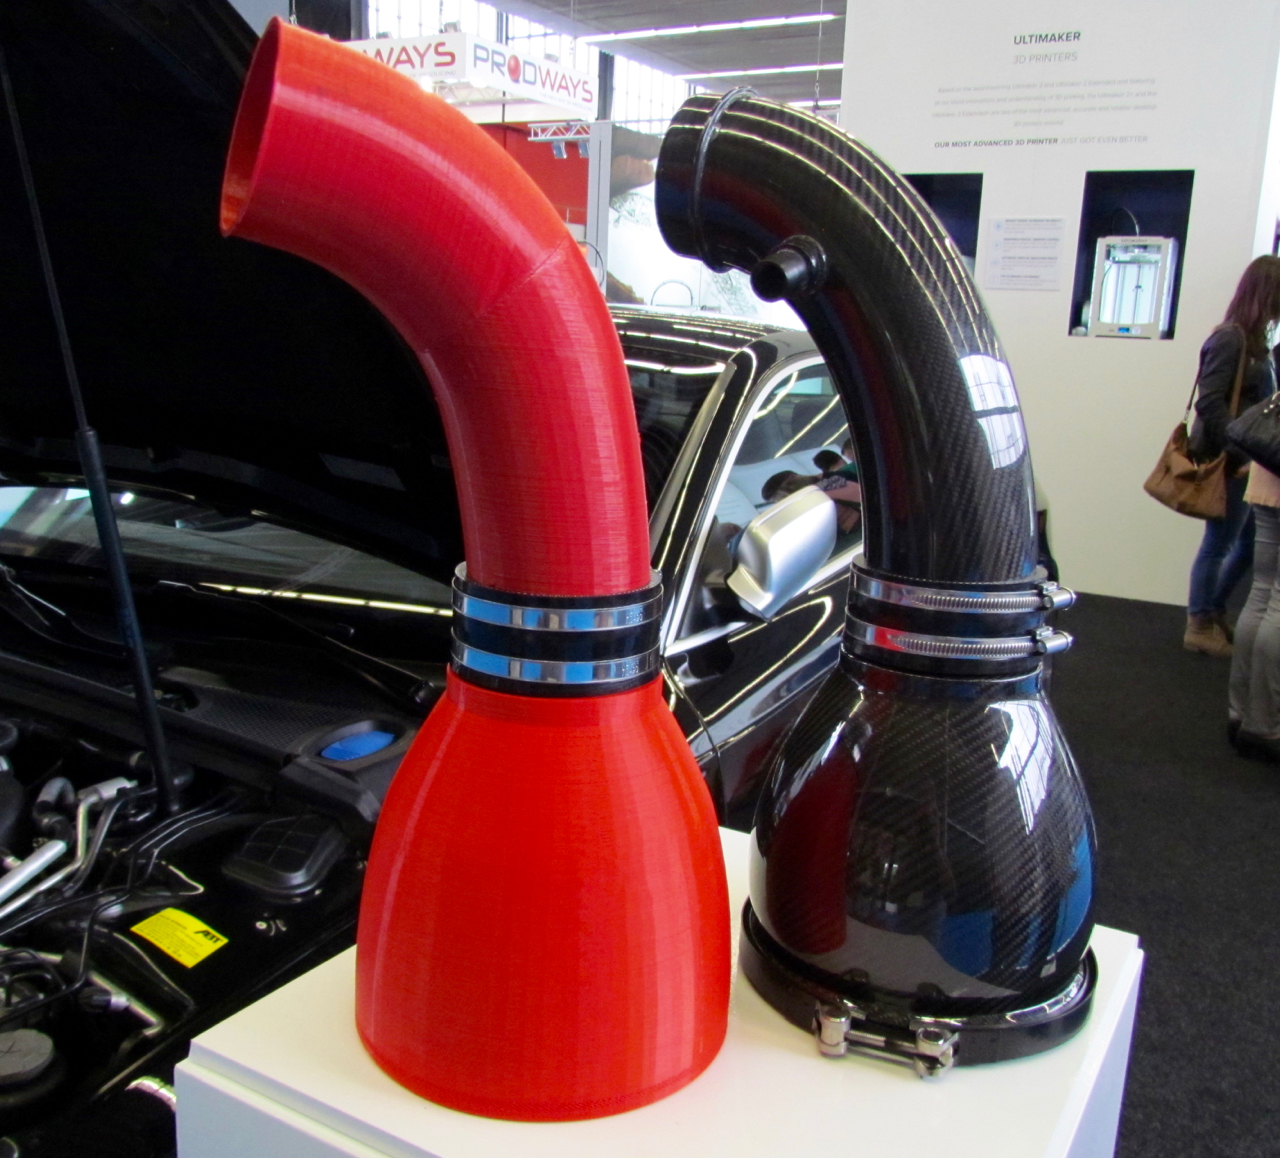  The Eventuri aftermarket air intake prototype and final product, made on the spot with an Ultimaker 2+ Extended 